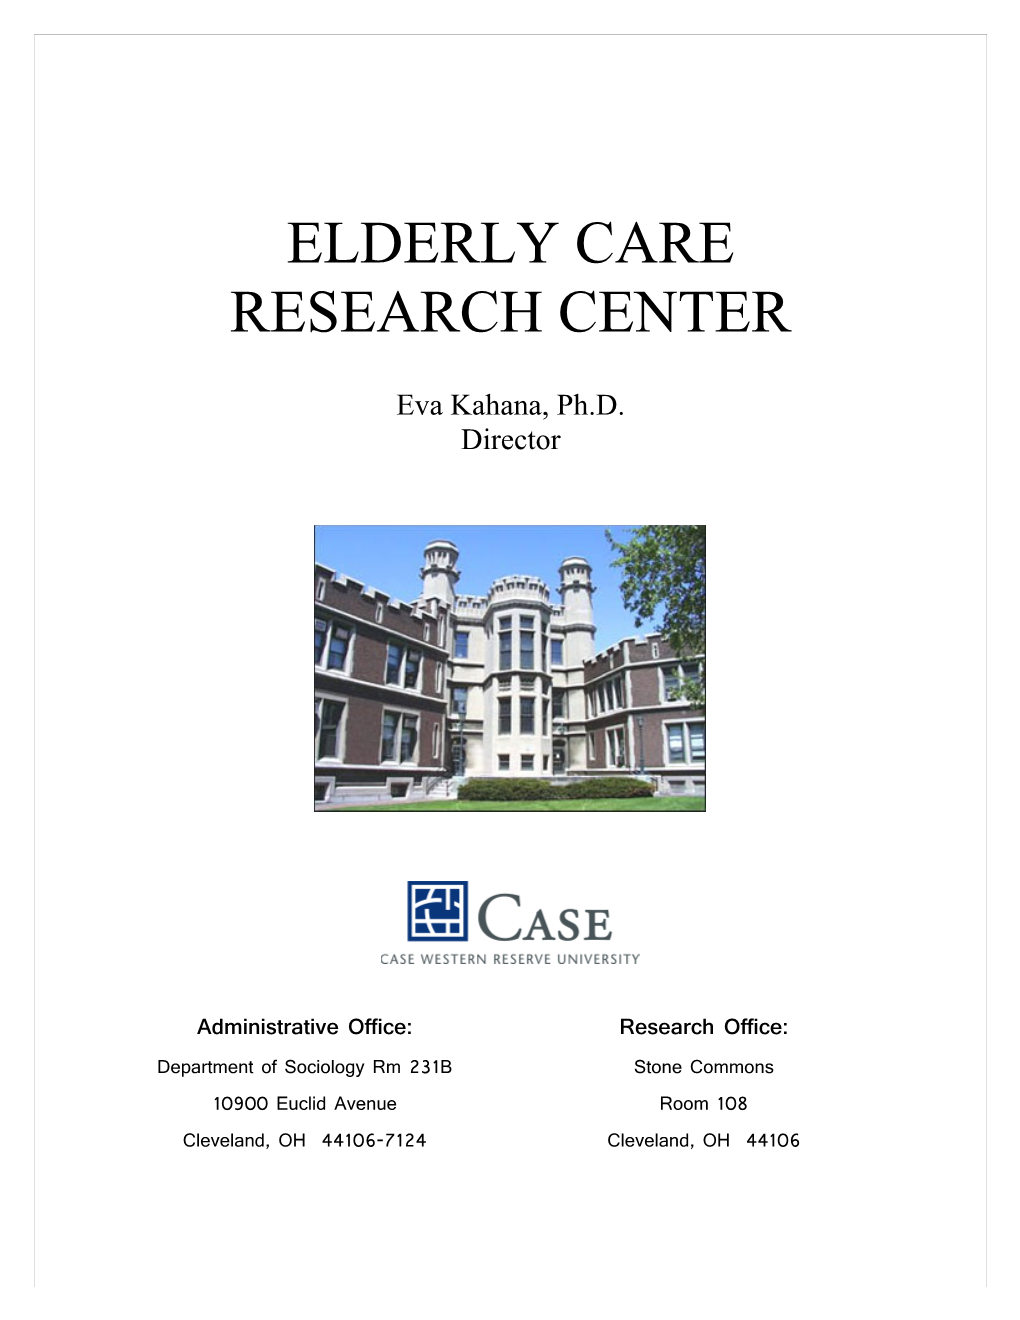 The Elderly Care Research Center